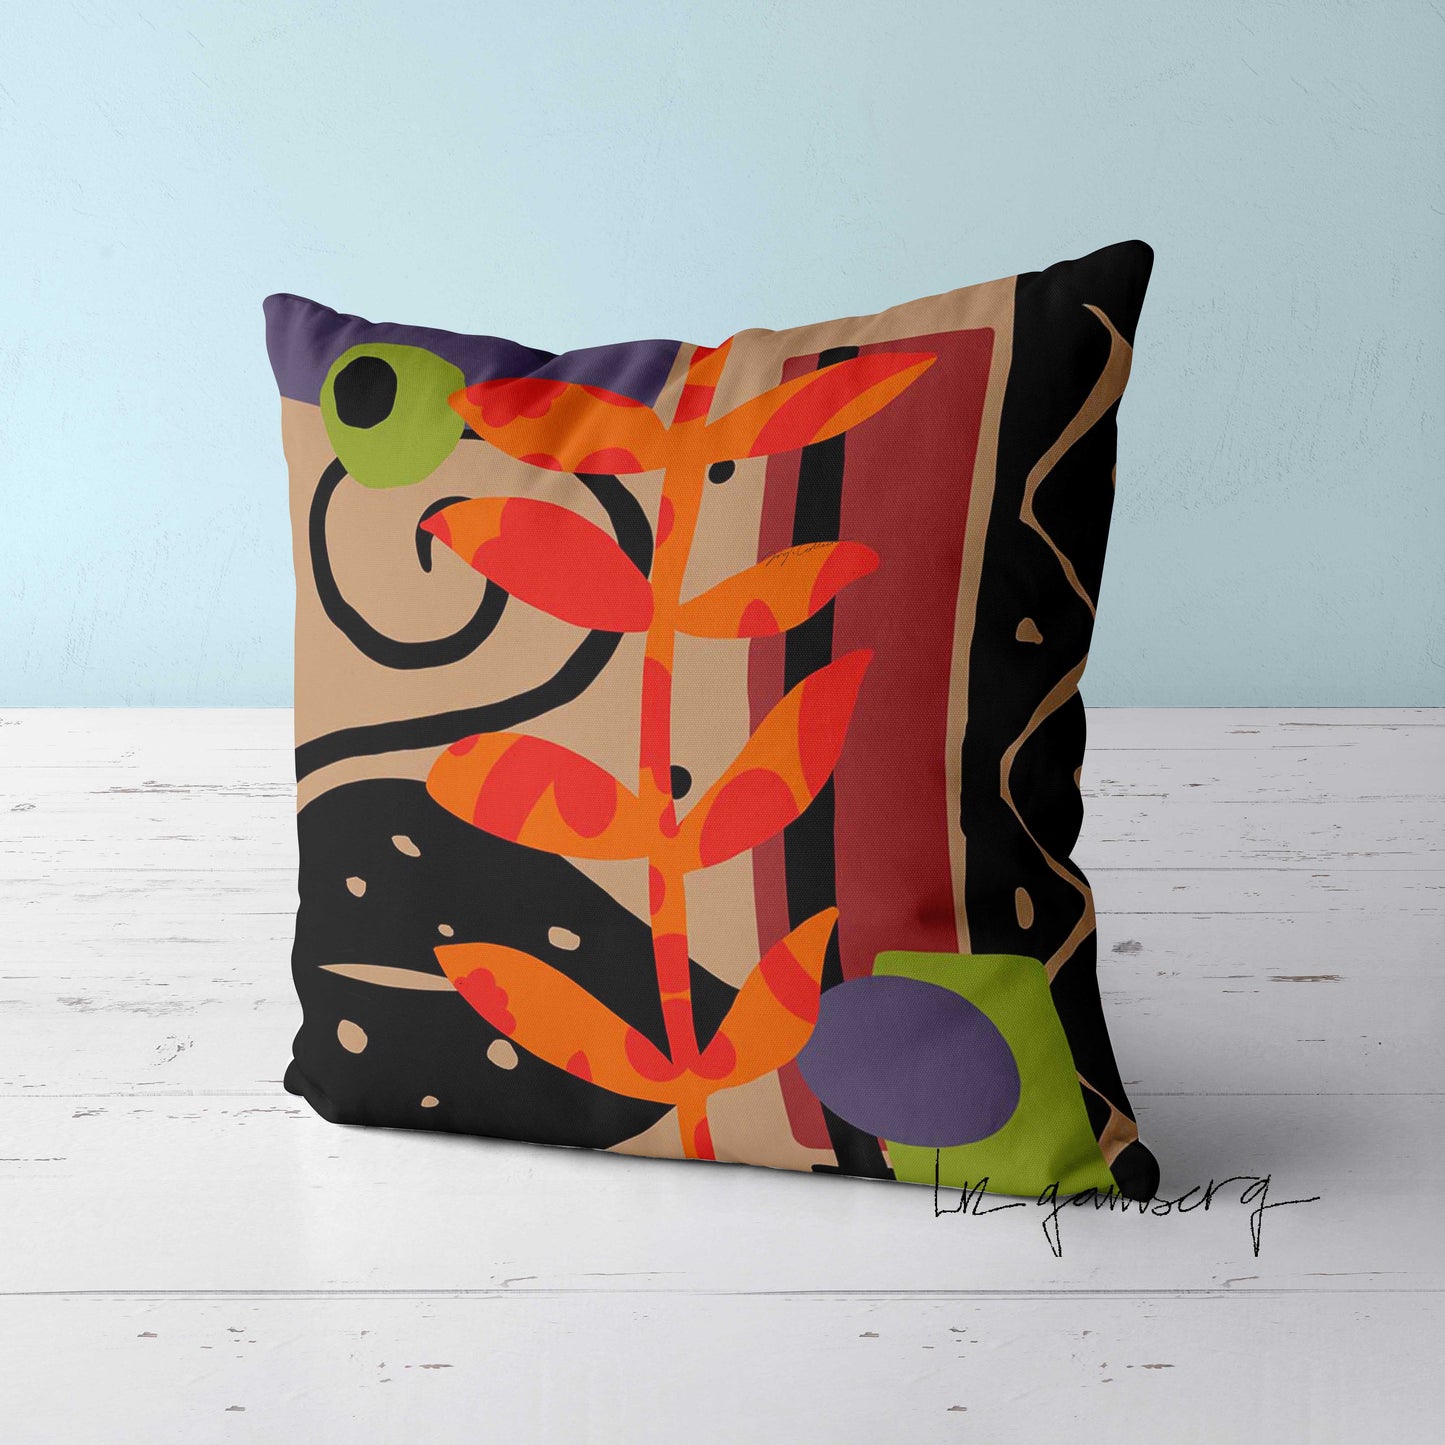 Feblilac Layered Vines Cushion Covers Throw Pillow Covers by Liz Gamberg Studio from US